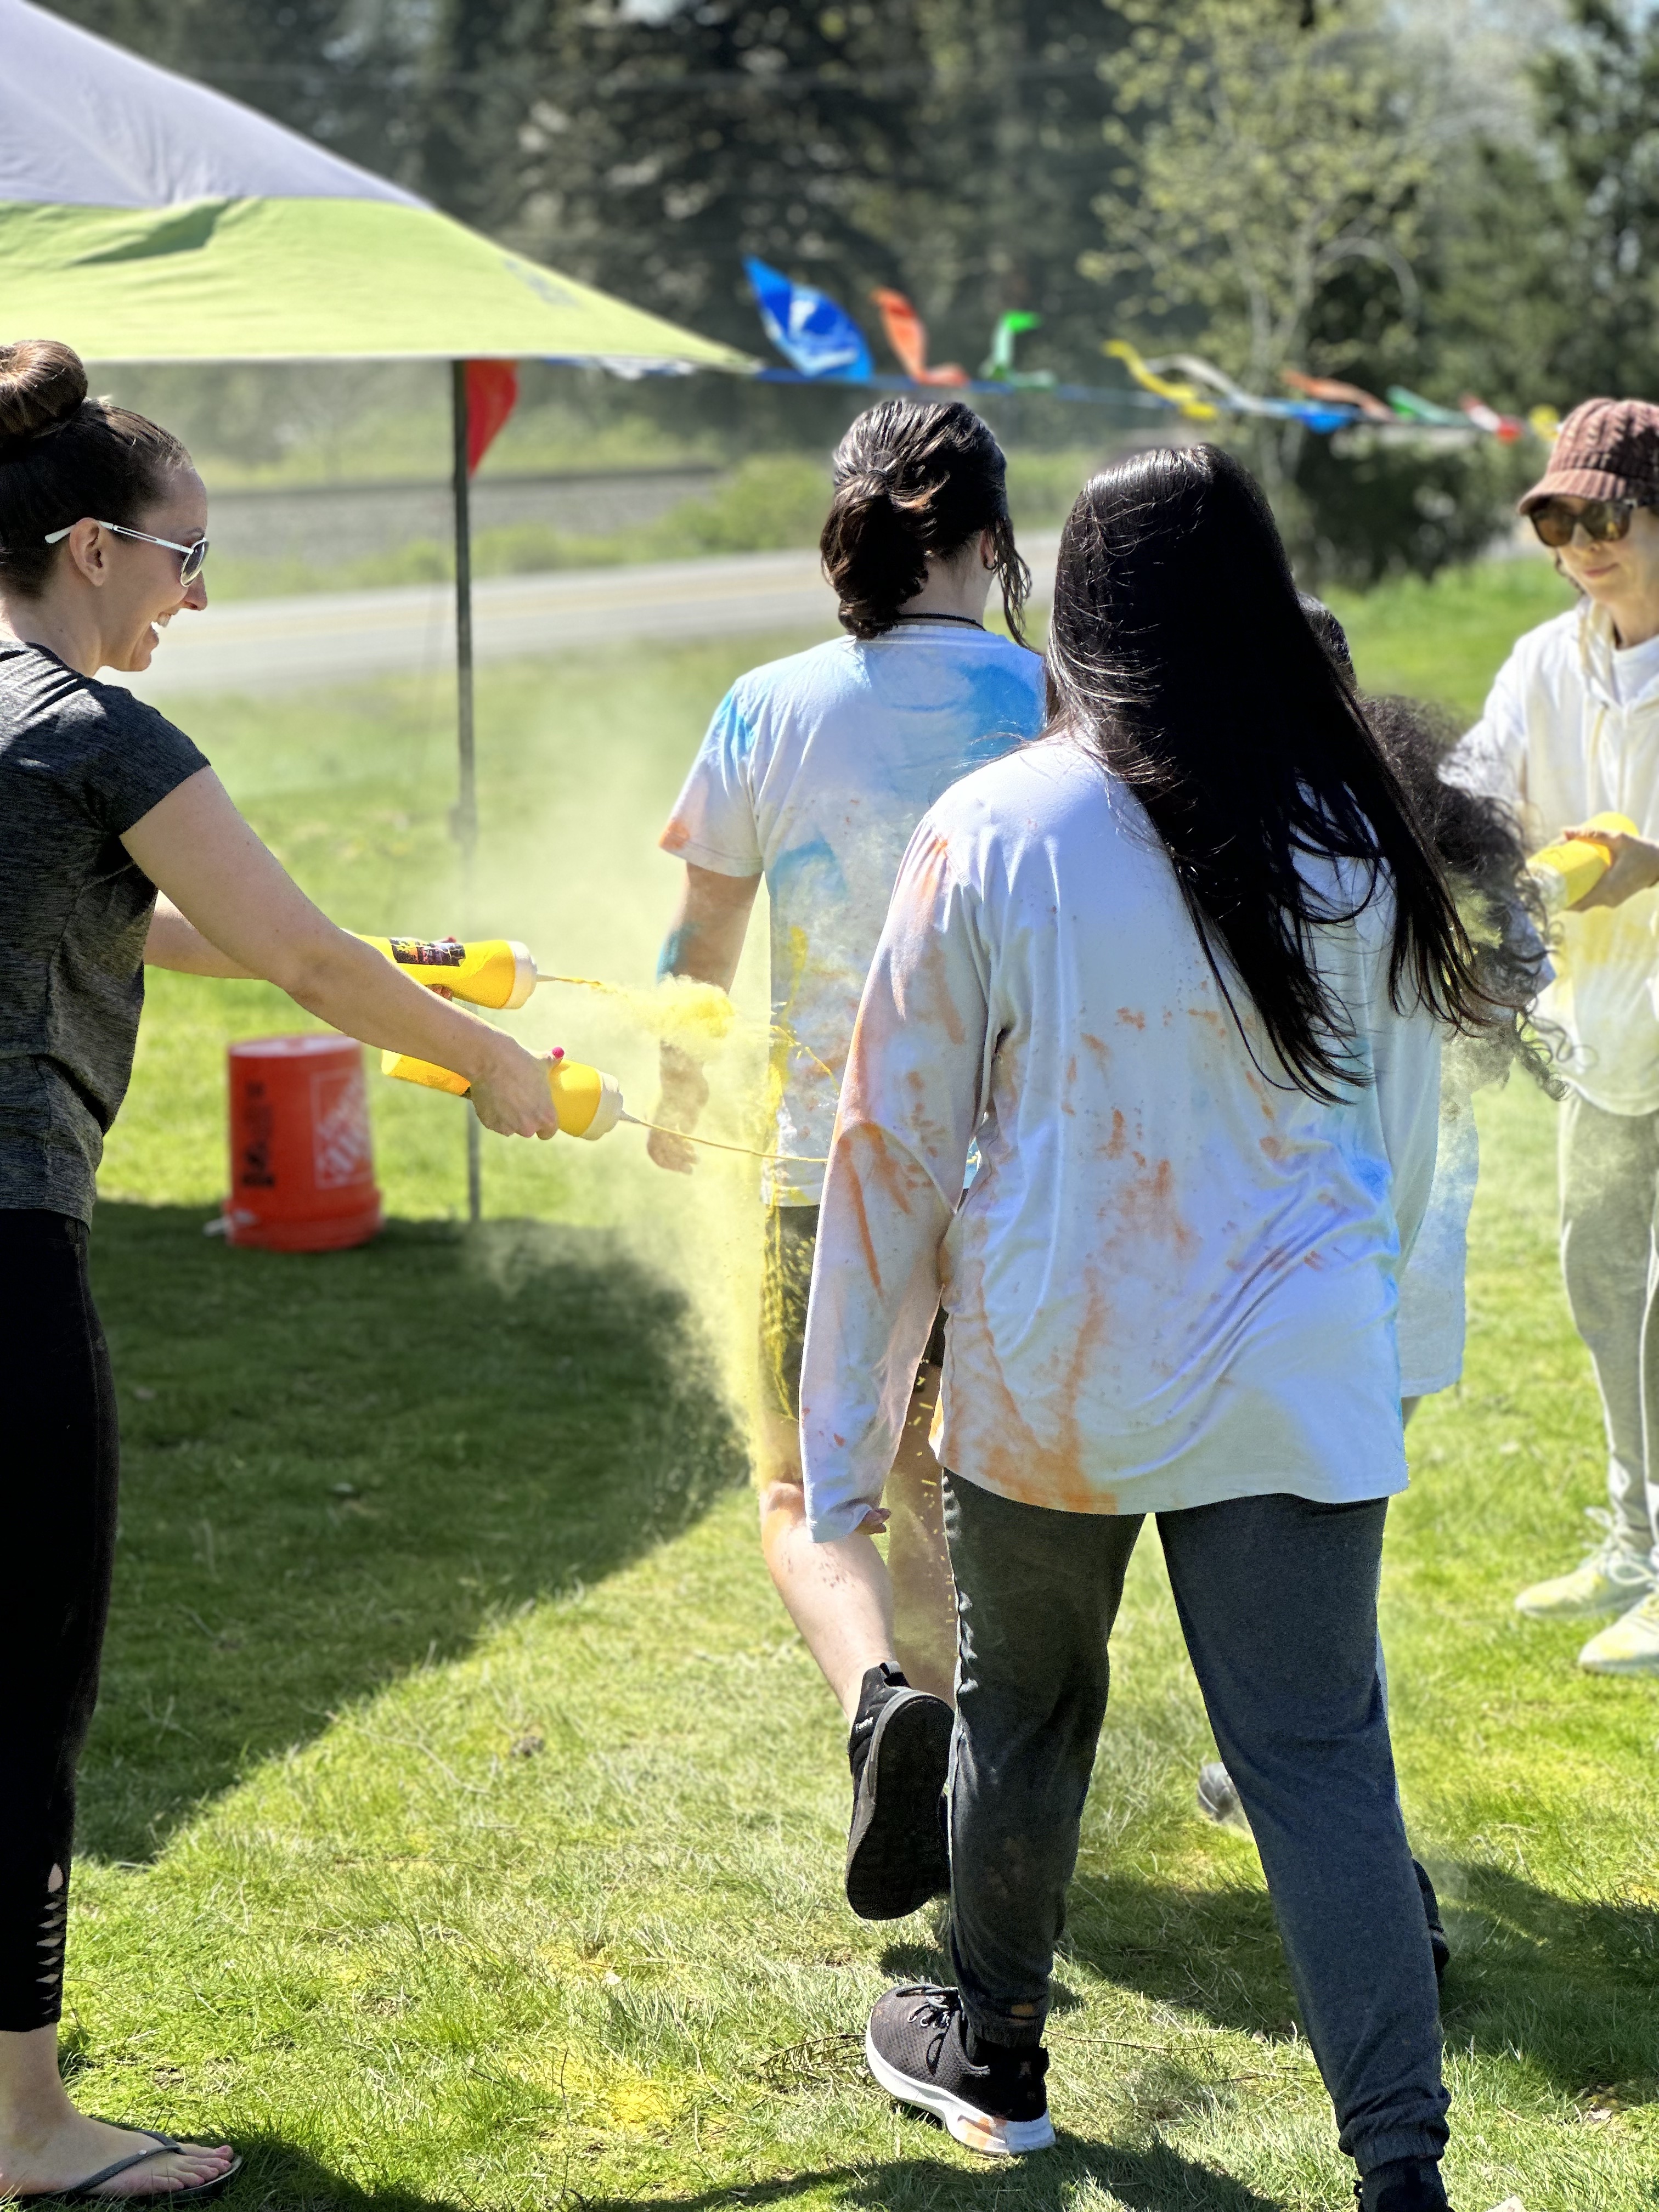 Student runs through two volunteers who spray them with yellow food safe dye